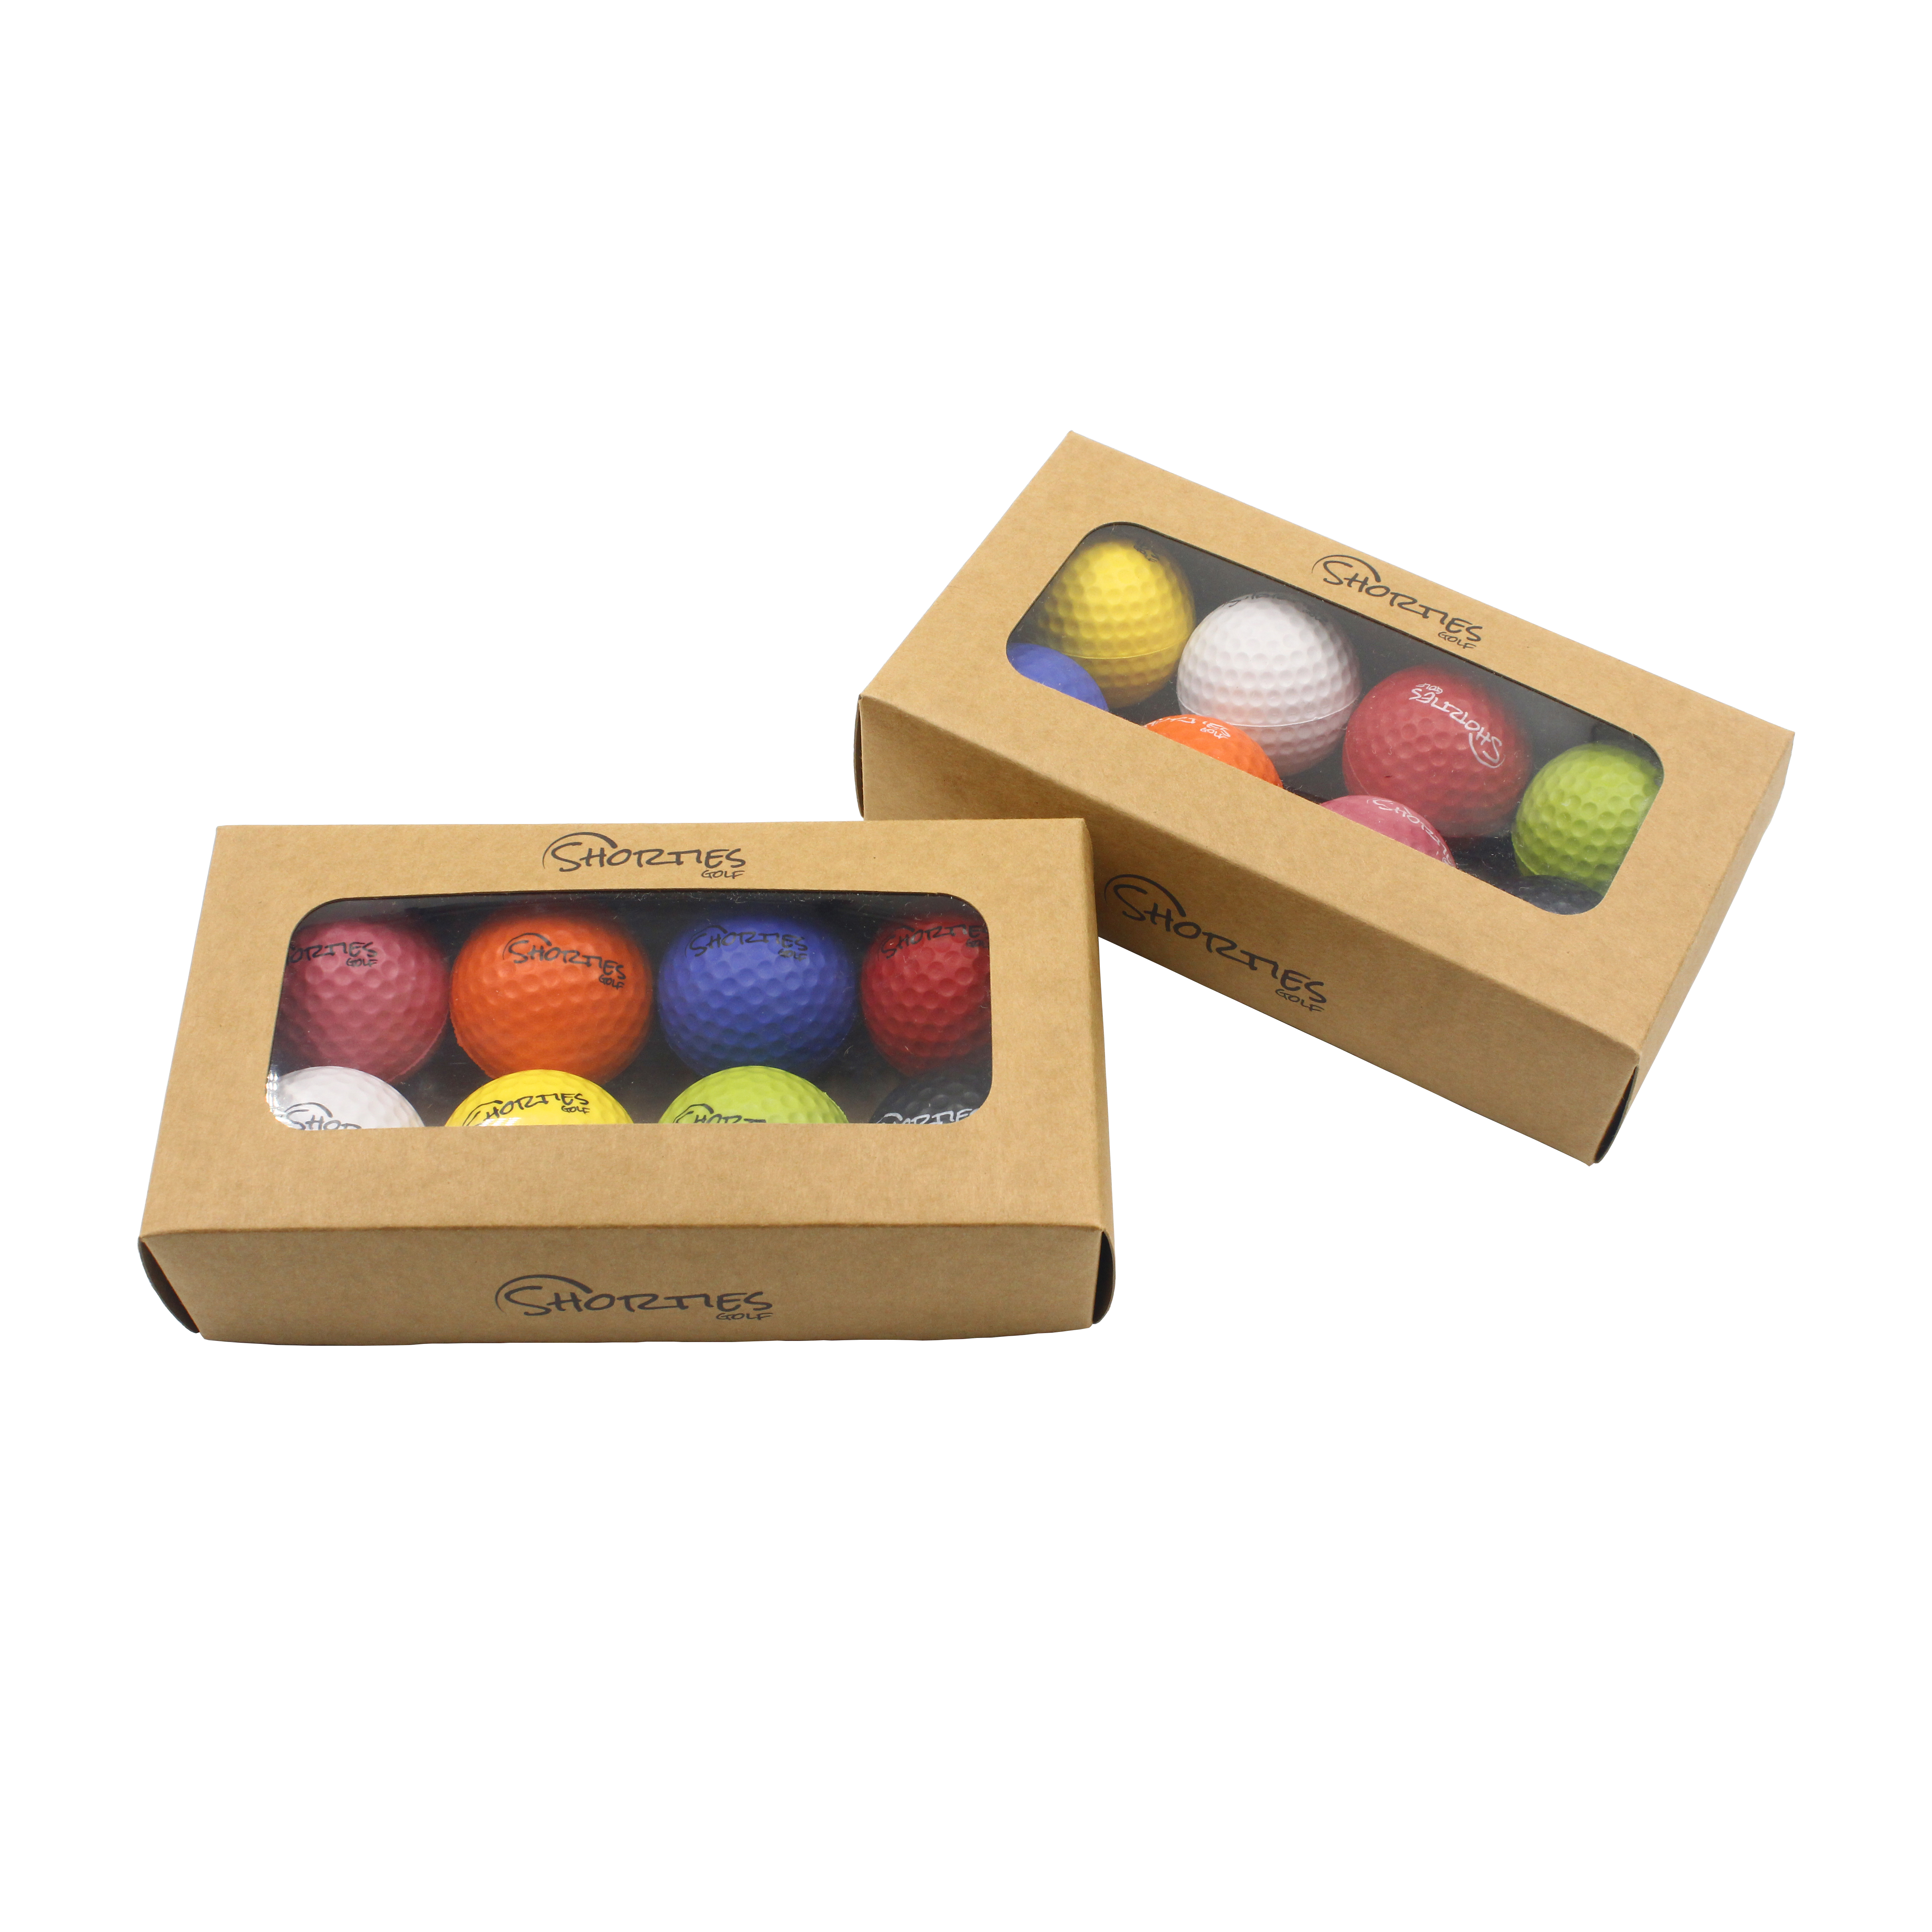 Factory Price Foam Golf Practice Balls Realistic Feel and Limited Flight Use Indoors or Outdoors